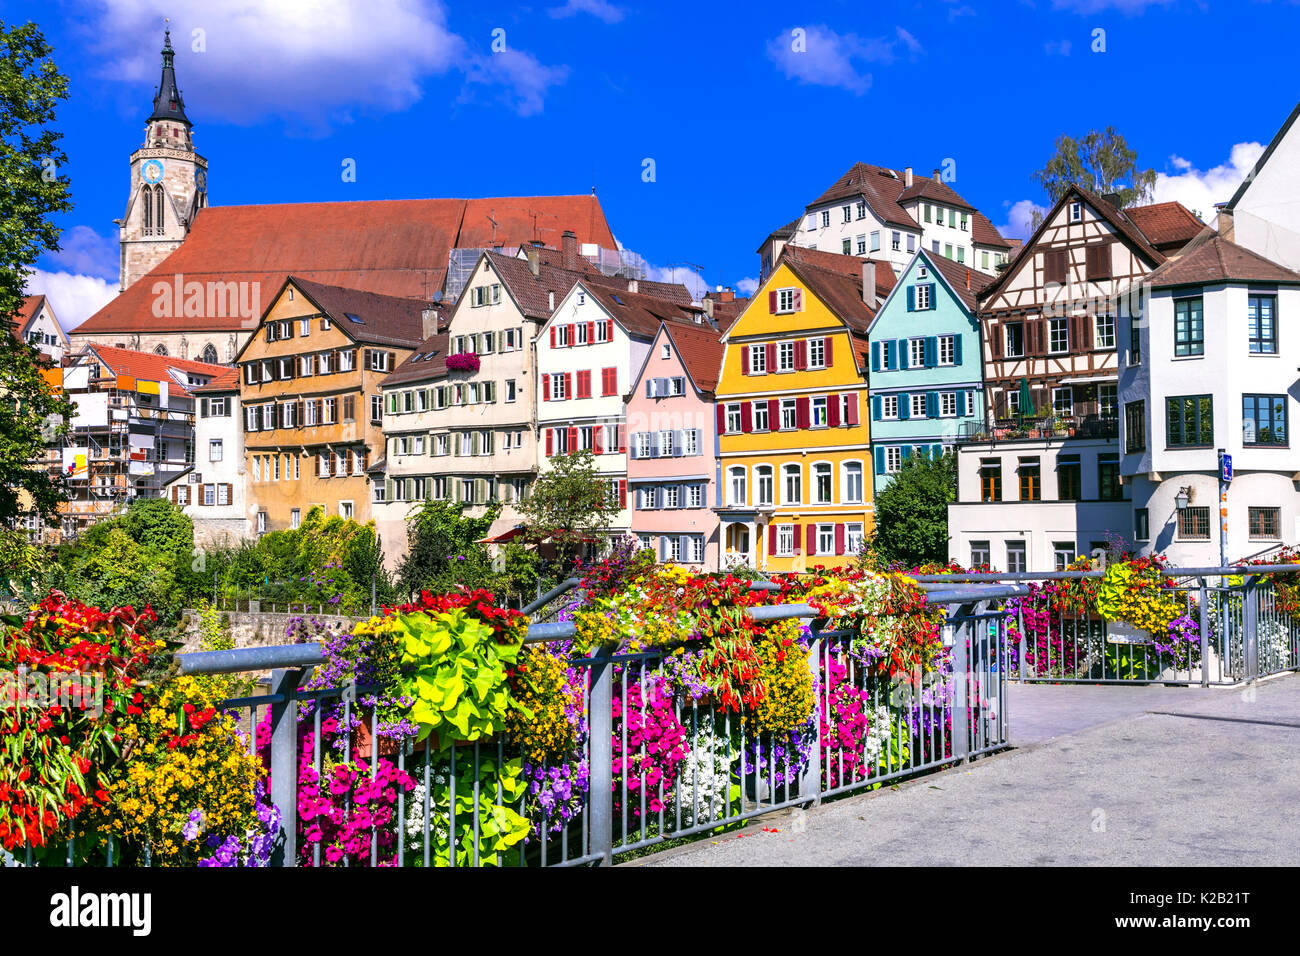 Beautiful places of Germany - colorful floral town Tubingen Stock Photo